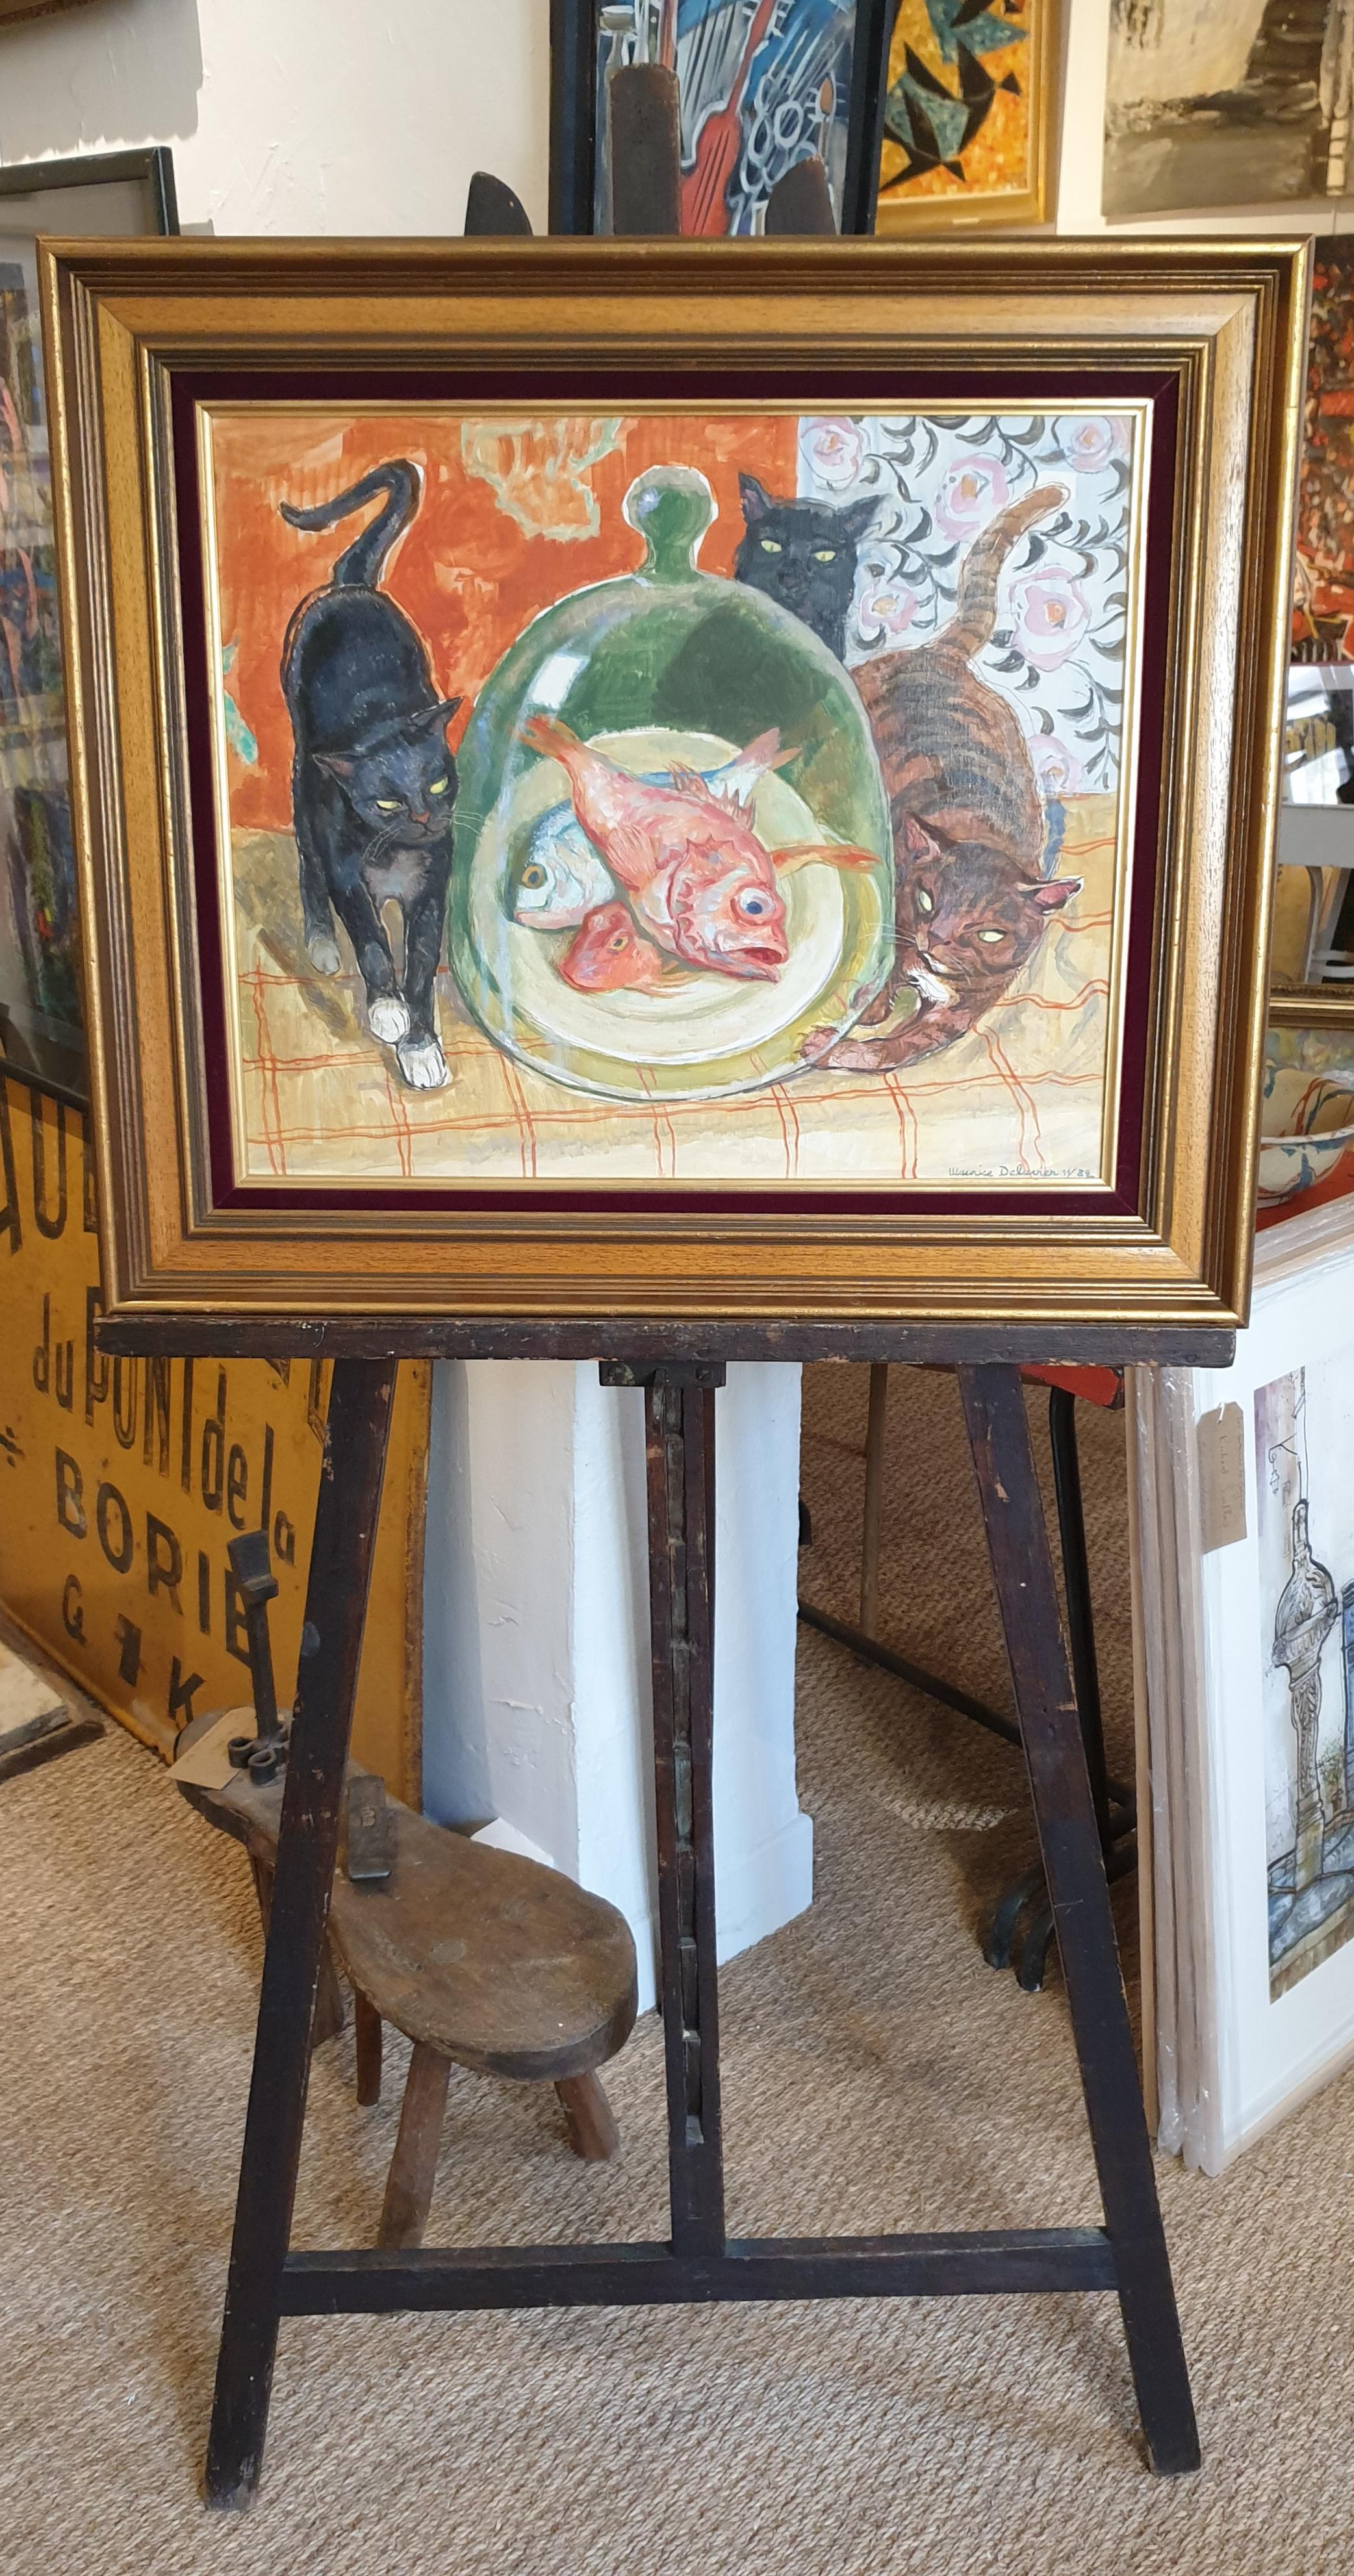 Late 20th century oil on canvas of an interior scene with cats and fish by French artist Maurice Delavier, signed and dated (November '82) to the bottom right. Presented in fine wood frame with velvet insert.

A totally charming, beautifully drawn